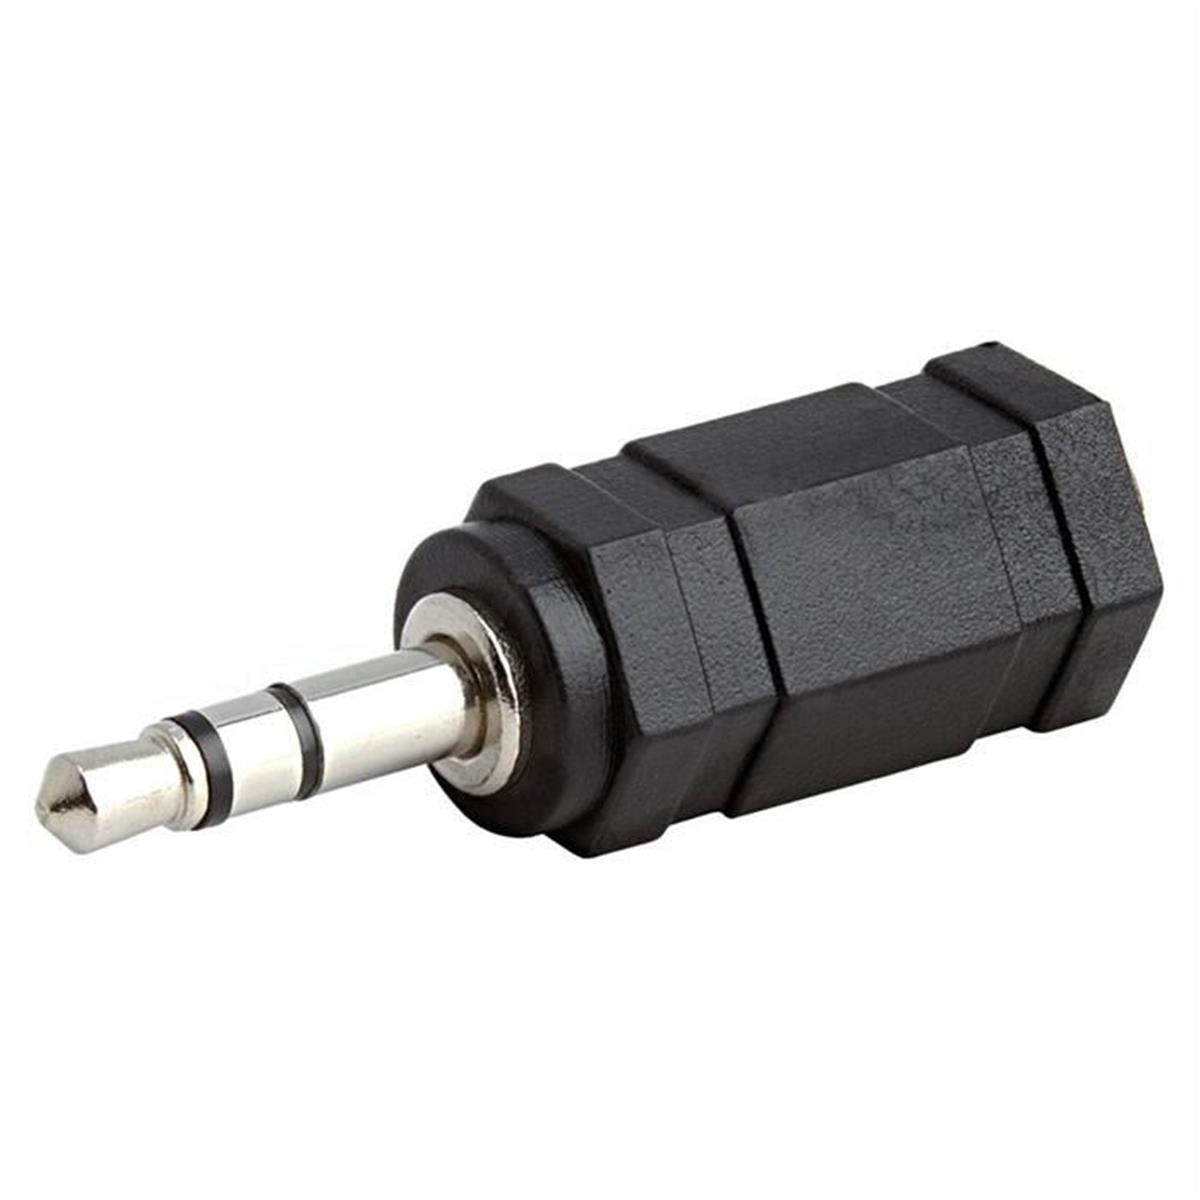 161-n 3.5 Mm Stereo Plug To 3.5 Mm Stereo Jack Adapter